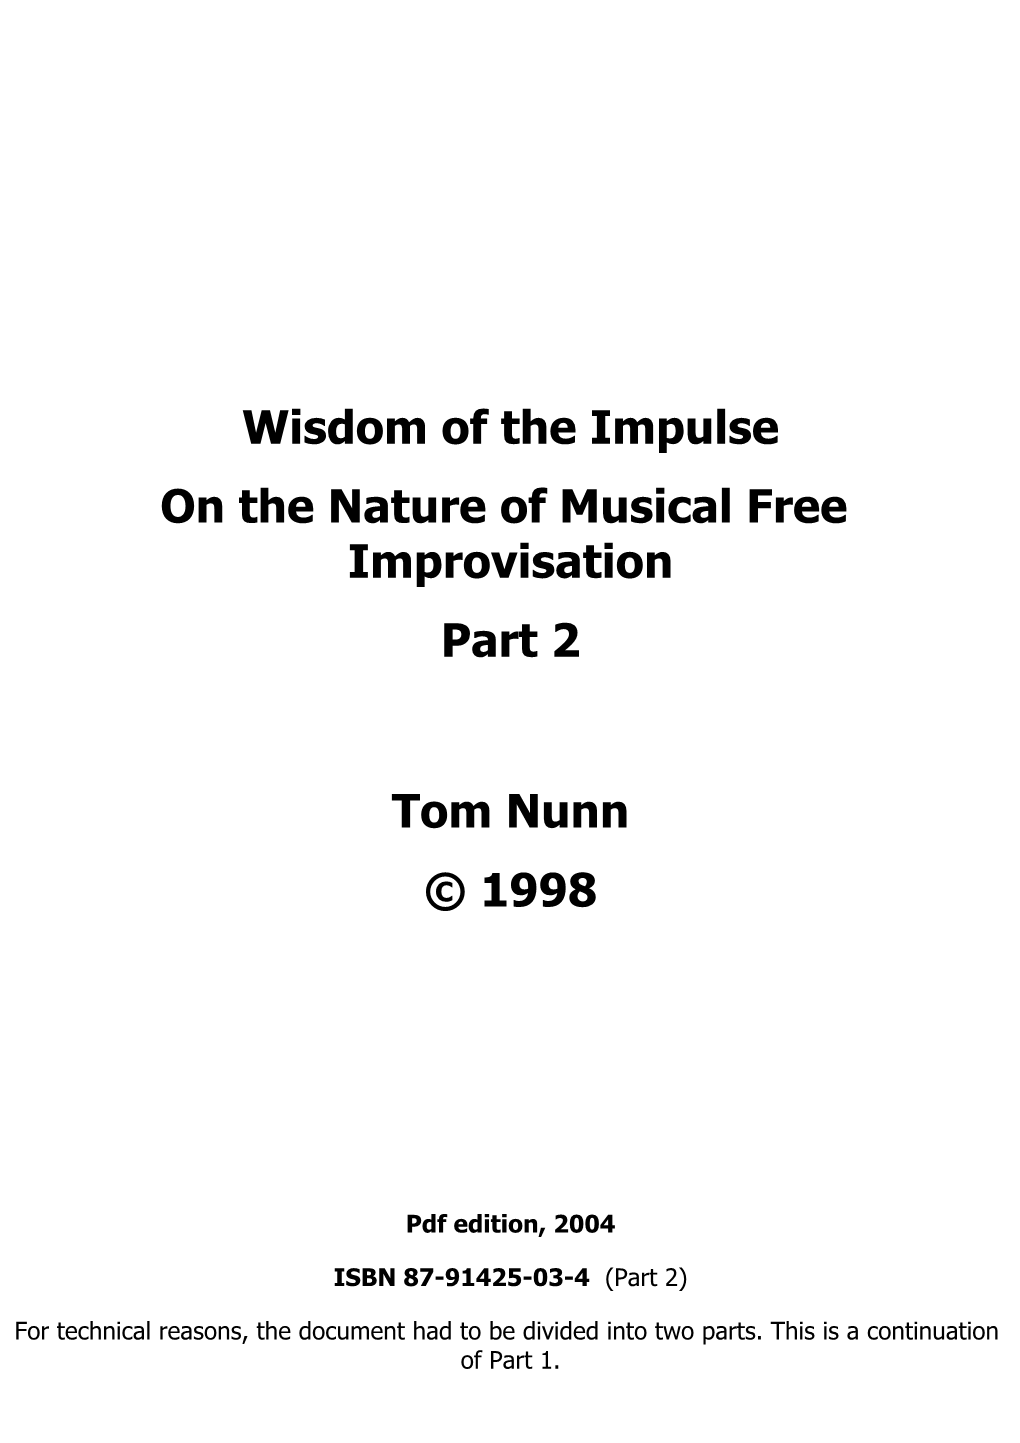 Wisdom of the Impulse on the Nature of Musical Free Improvisation Part 2